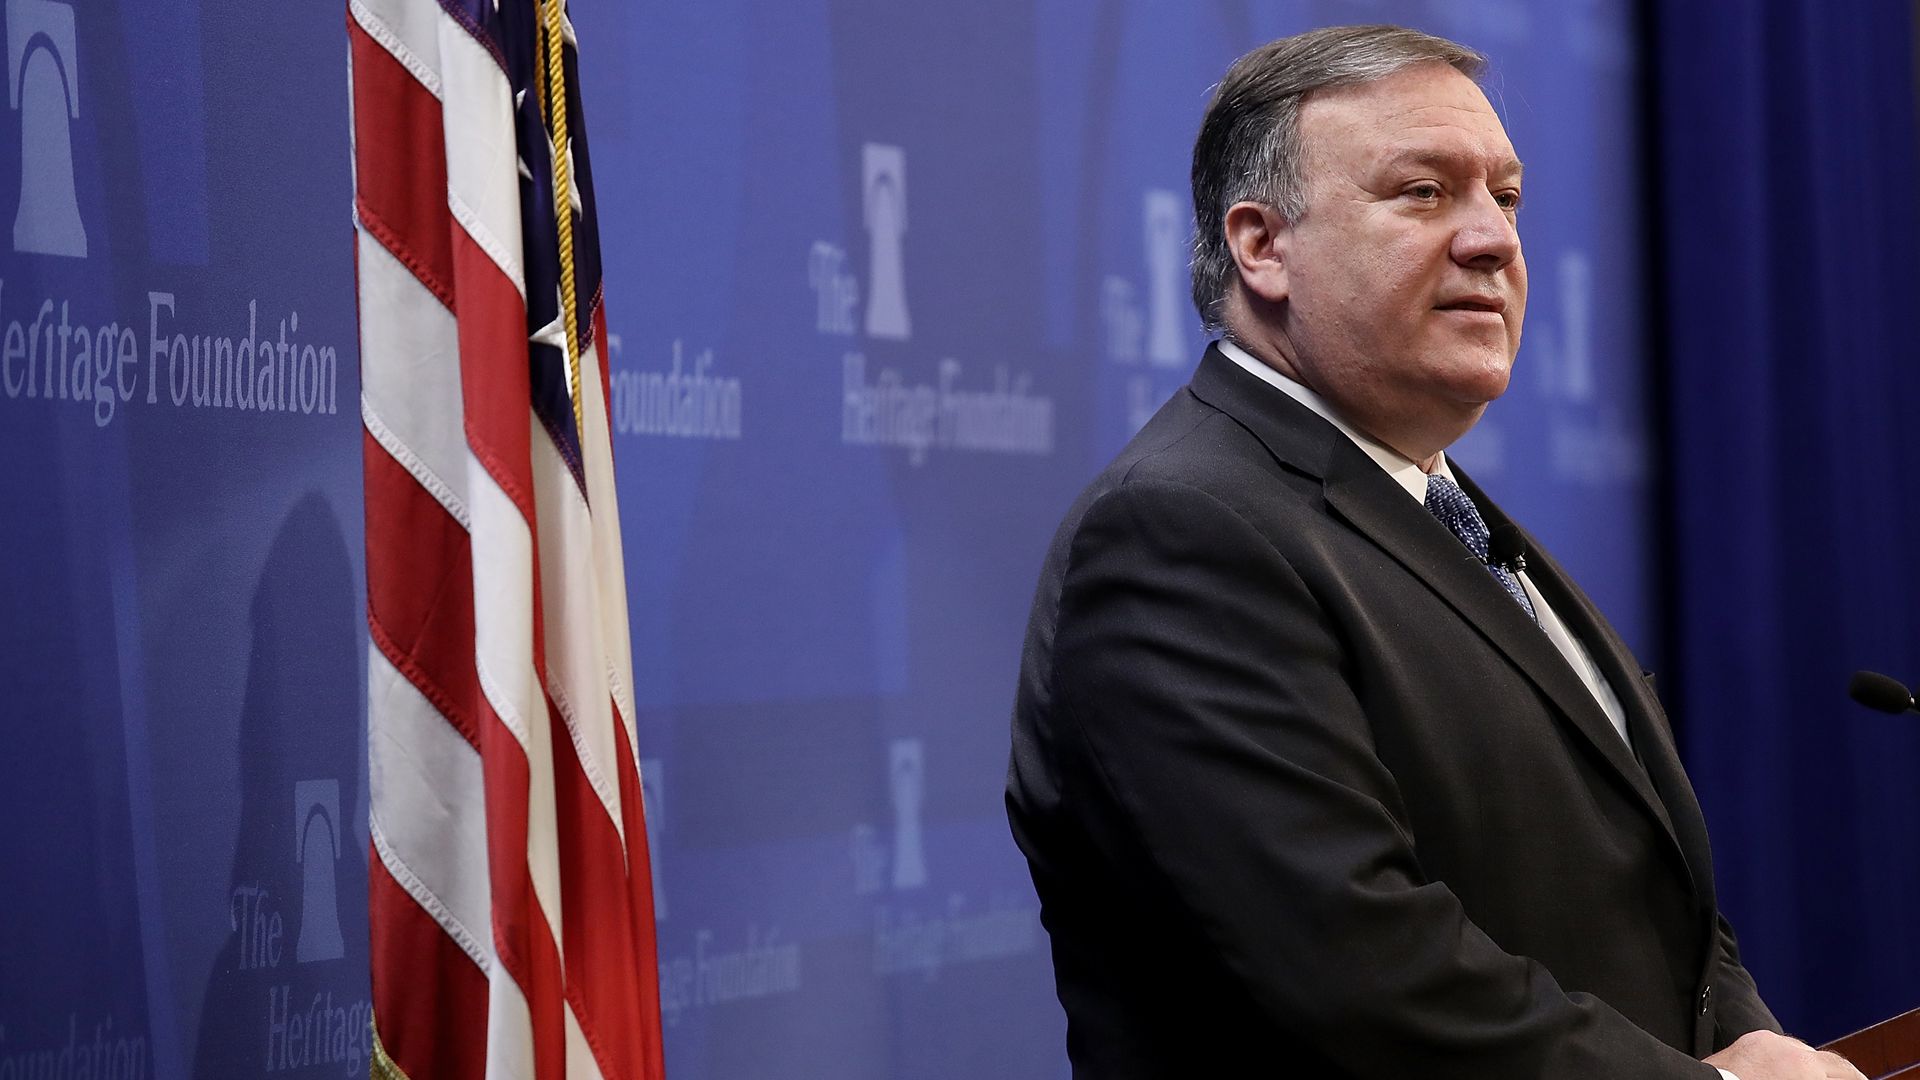 Mike Pompeo at lectern with American flag